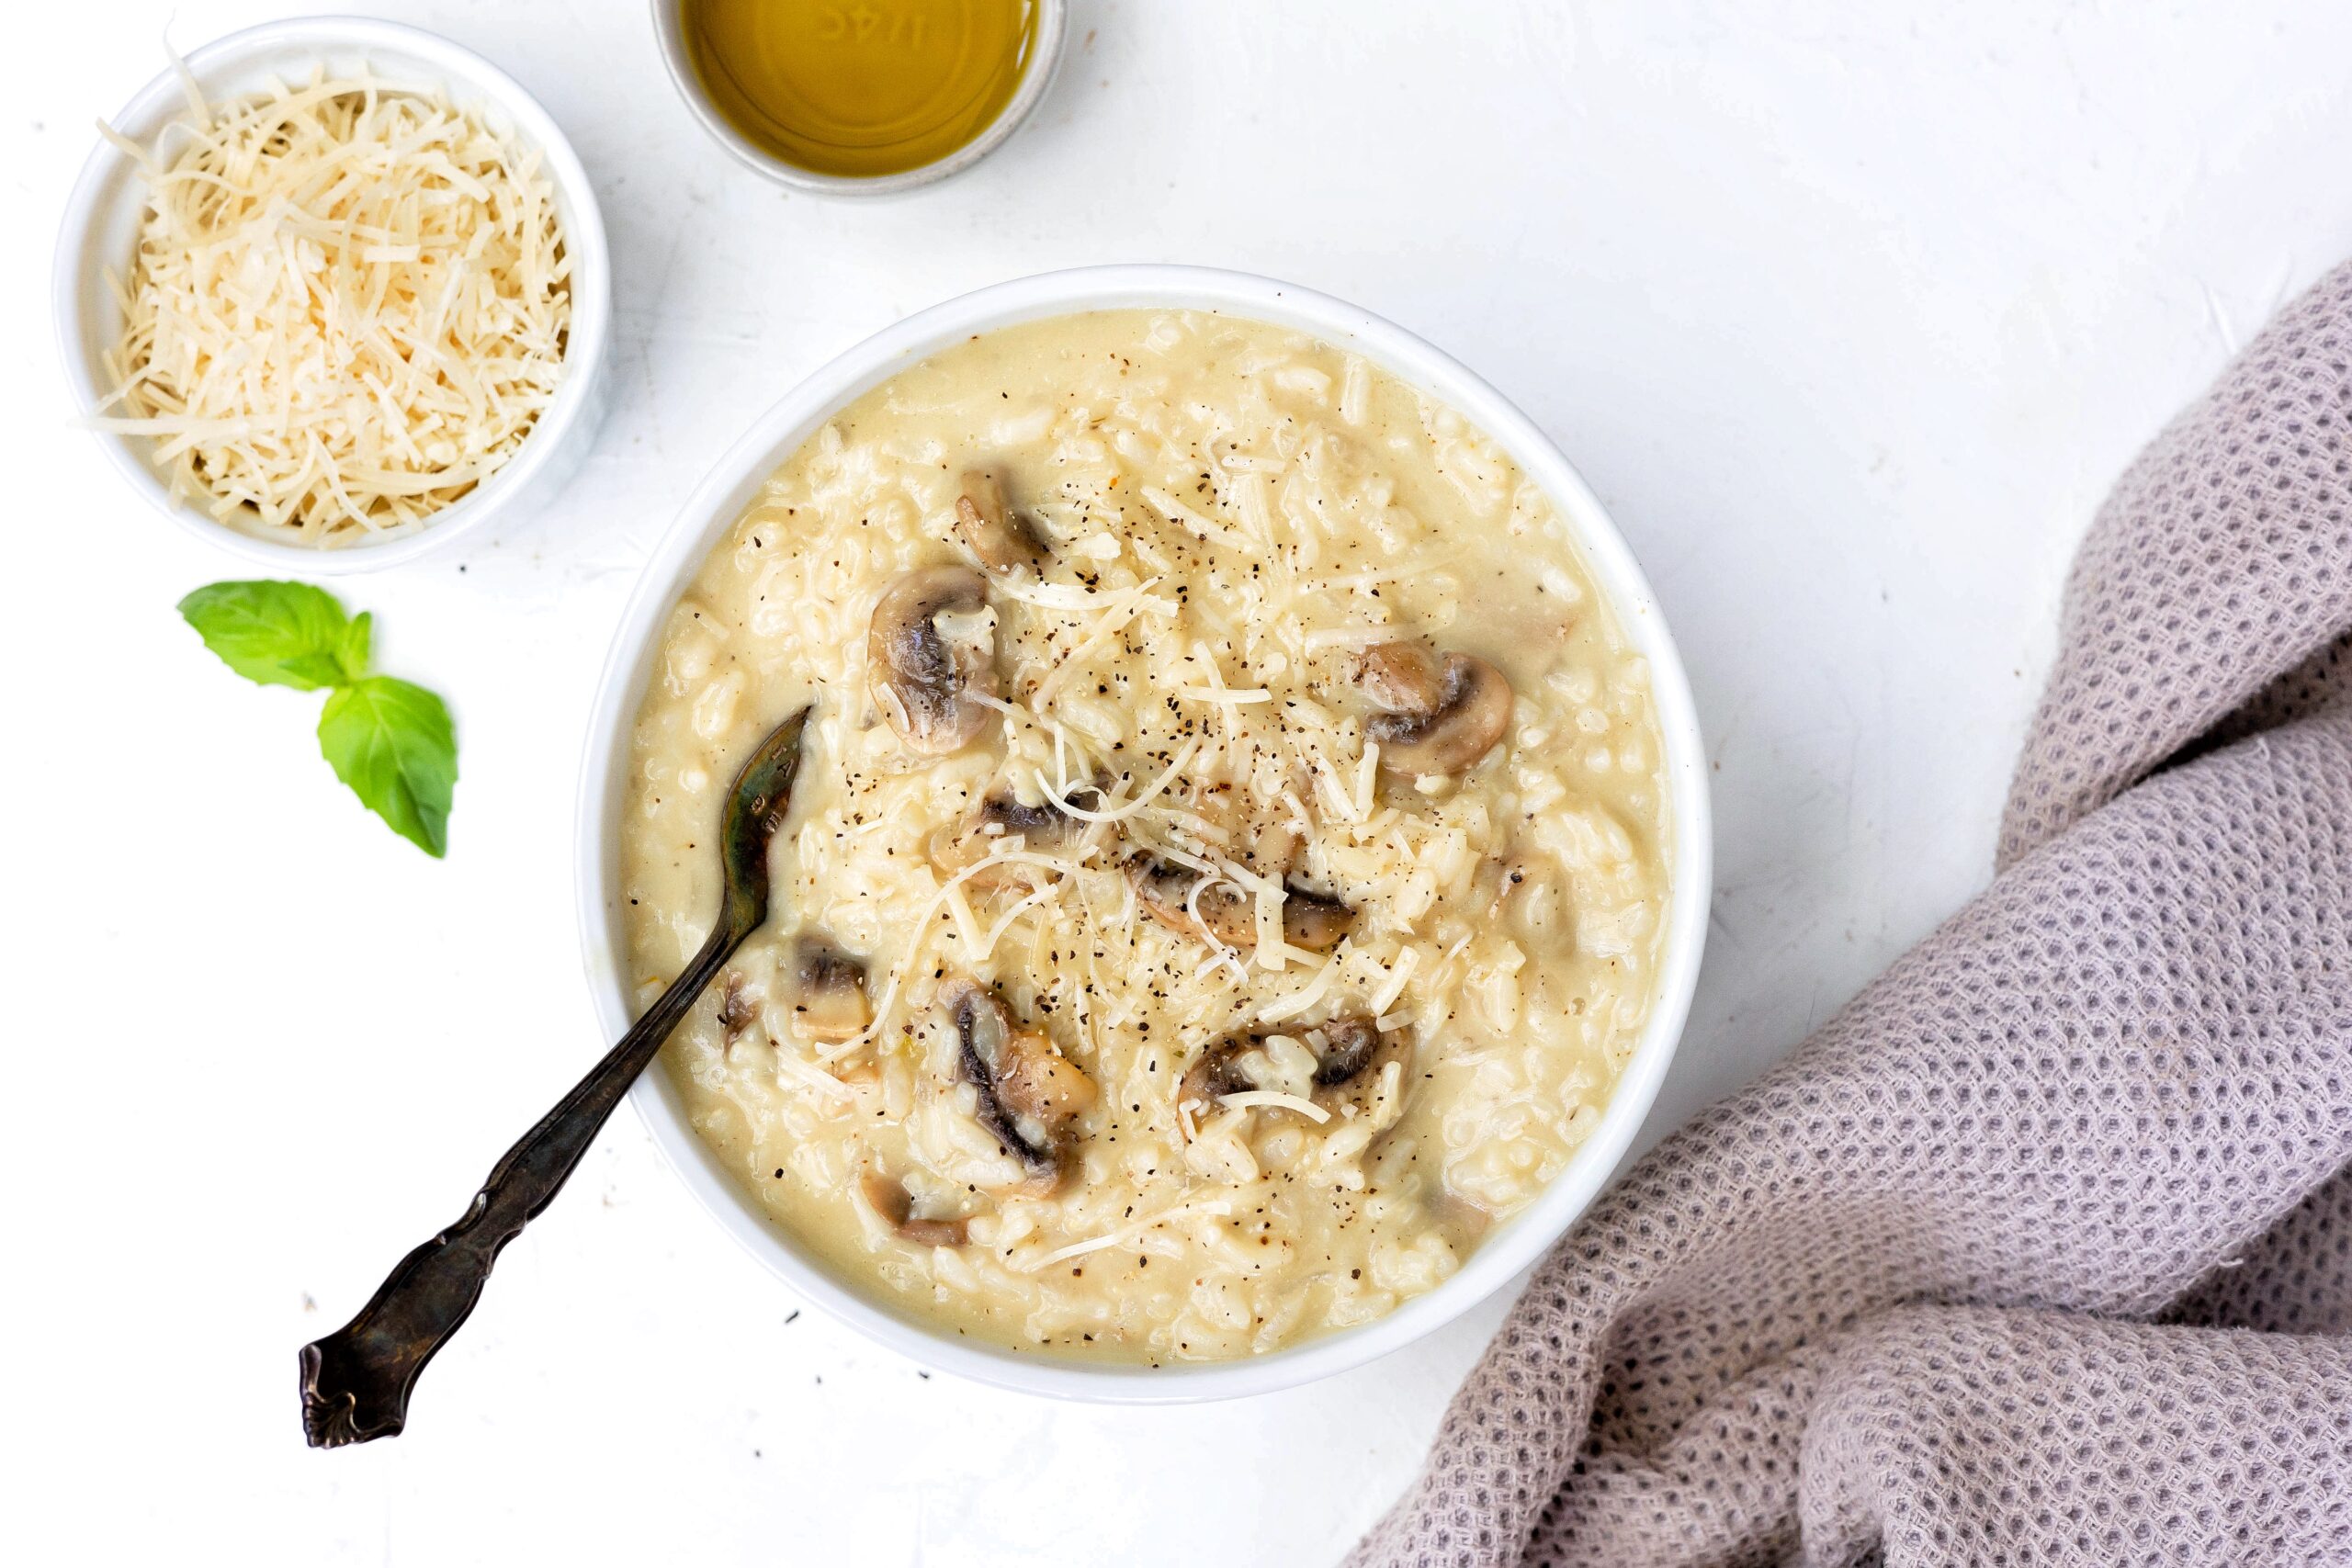 Instant Pot mushroom risotto with truffle oil